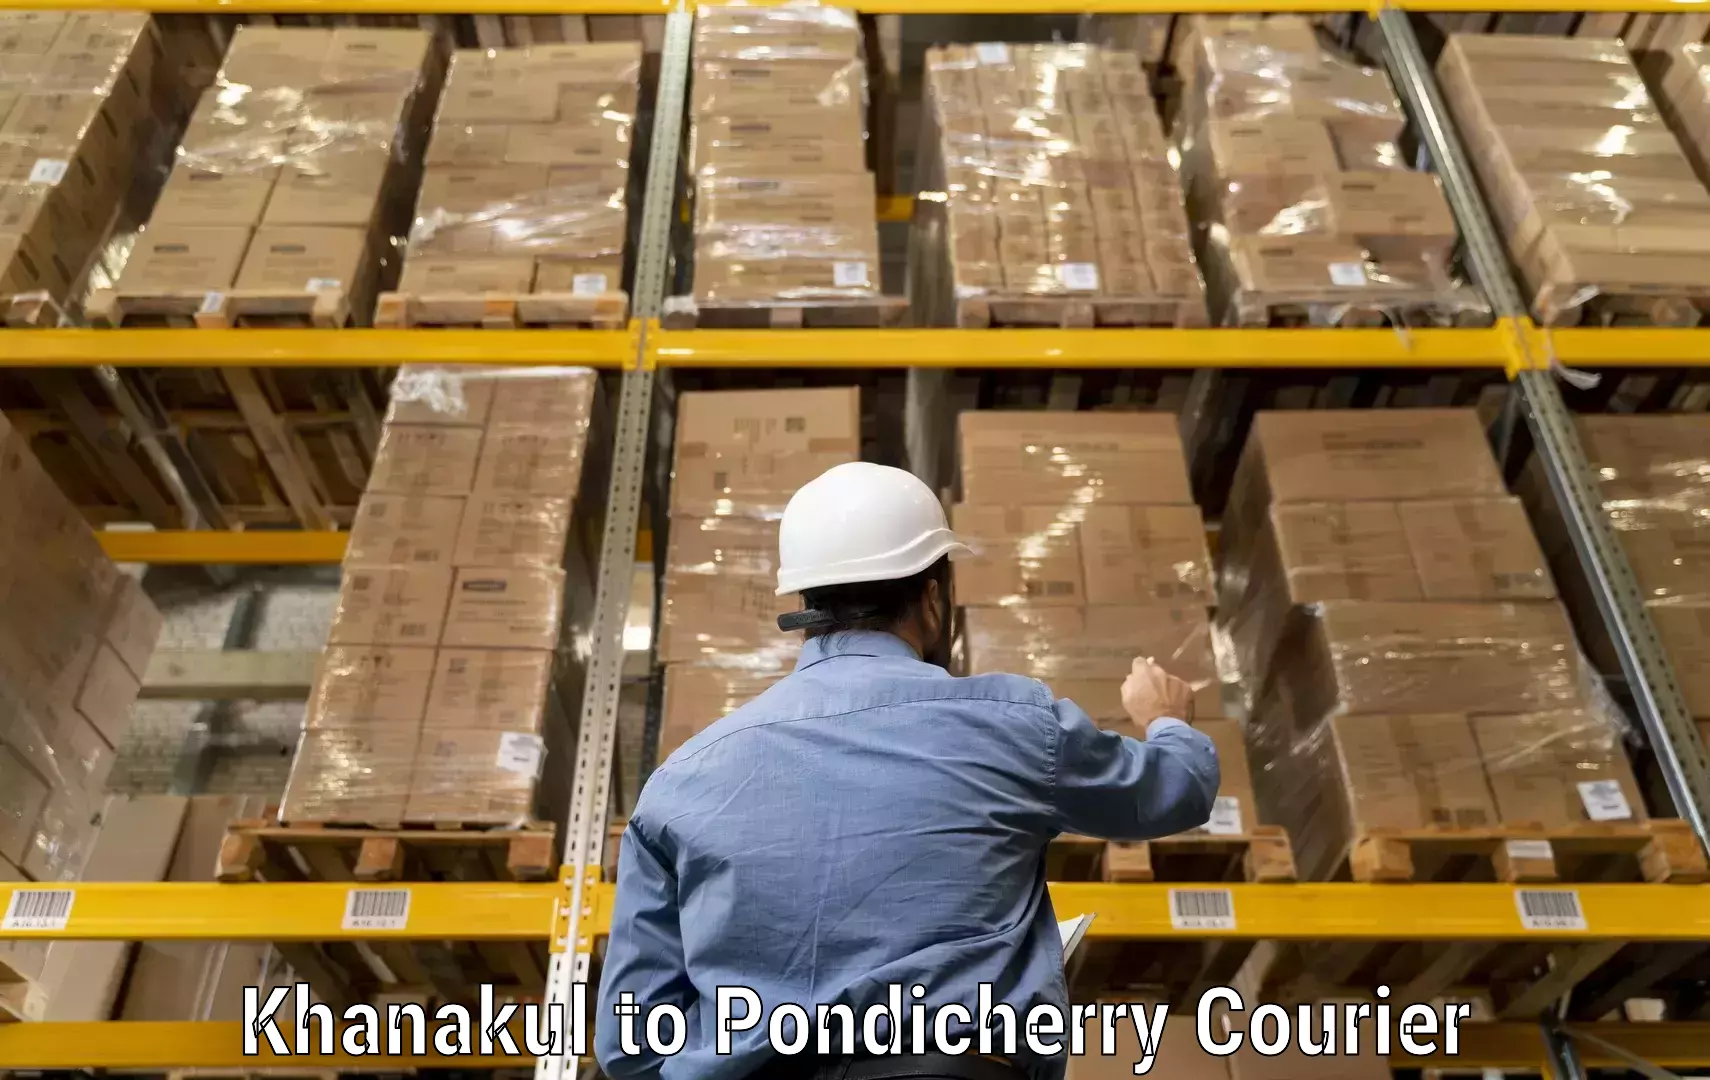 User-friendly delivery service Khanakul to Pondicherry